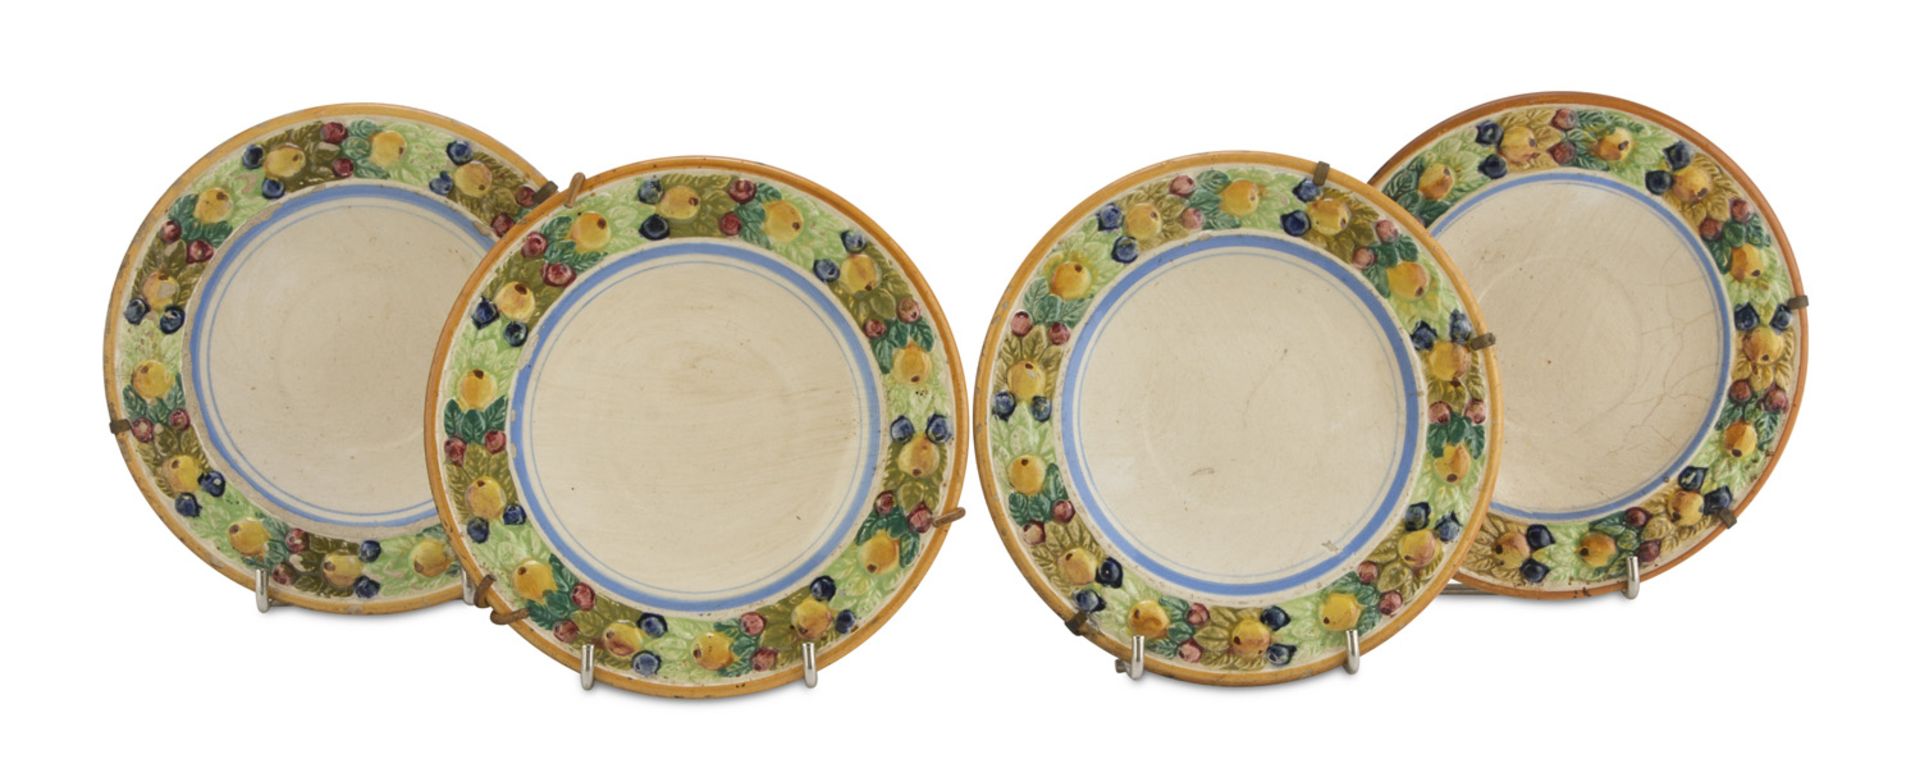 FOUR MAIOLICA DISHES, CANTAGALLI EARLY 20TH CENTURY white and polychrome enameled, edge decorated